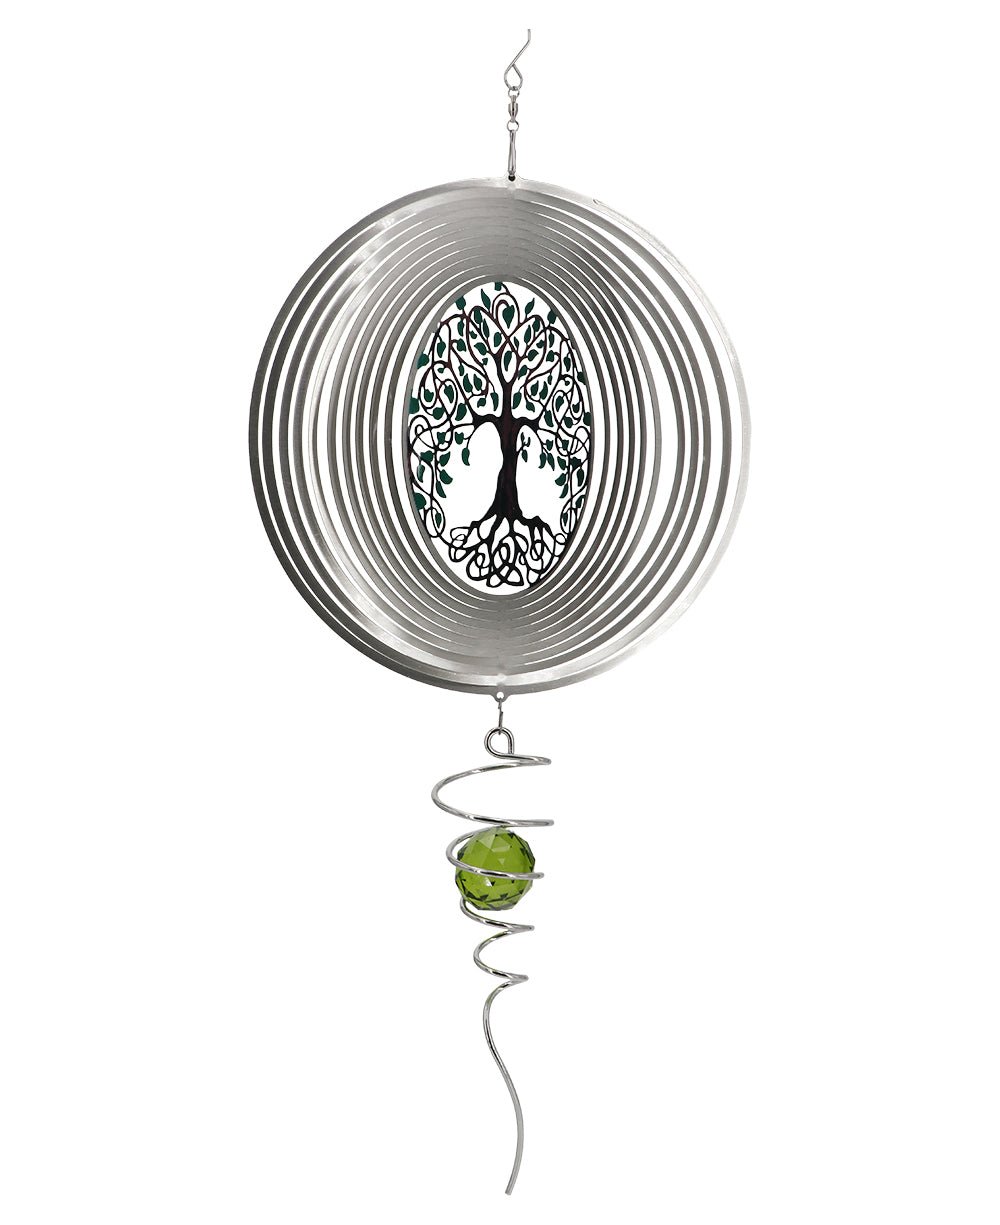 Large Tree of Life Kinetic Wind Spinner with Crystal Twister Spiral Tail - Wind Wheels & Spinners